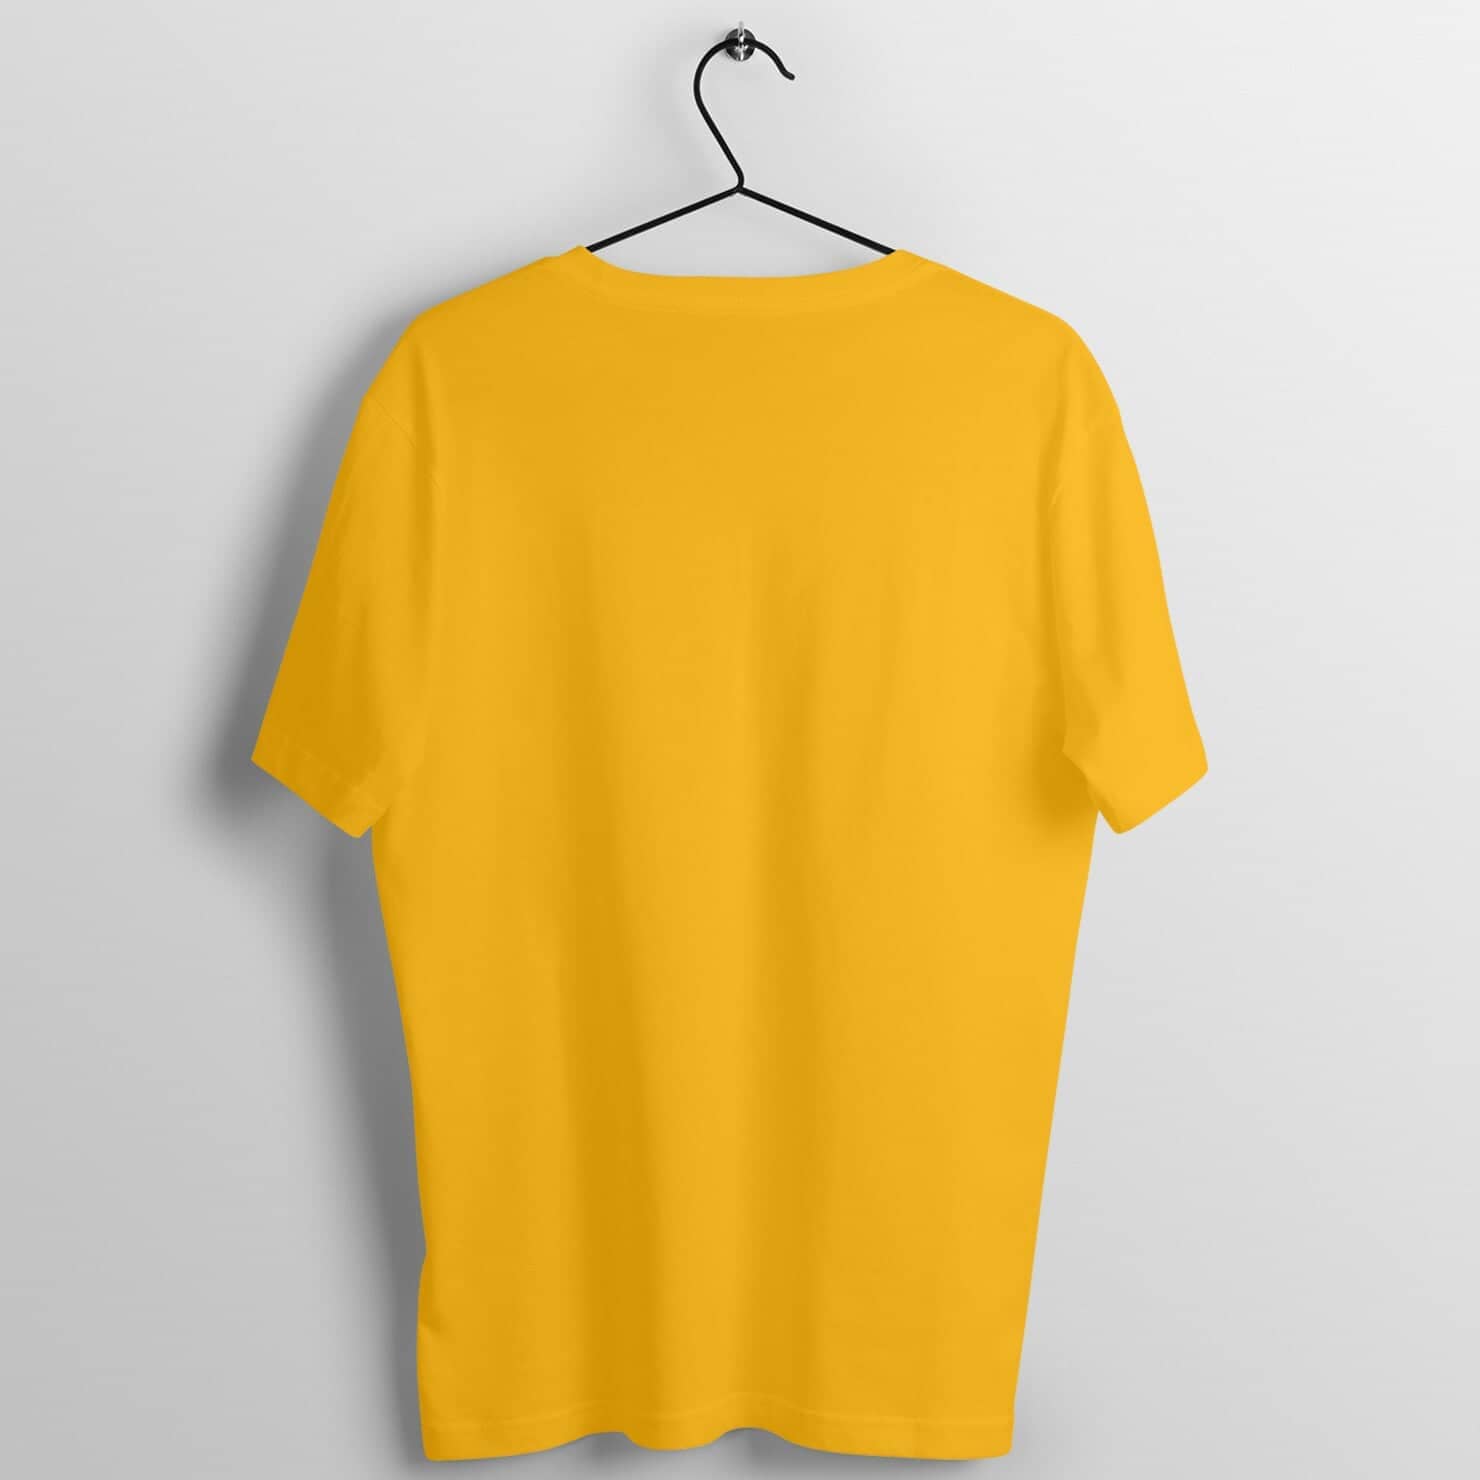 Bruce Lee Fighting Exclusive Golden Yellow T Shirt for Men and Women Printrove 